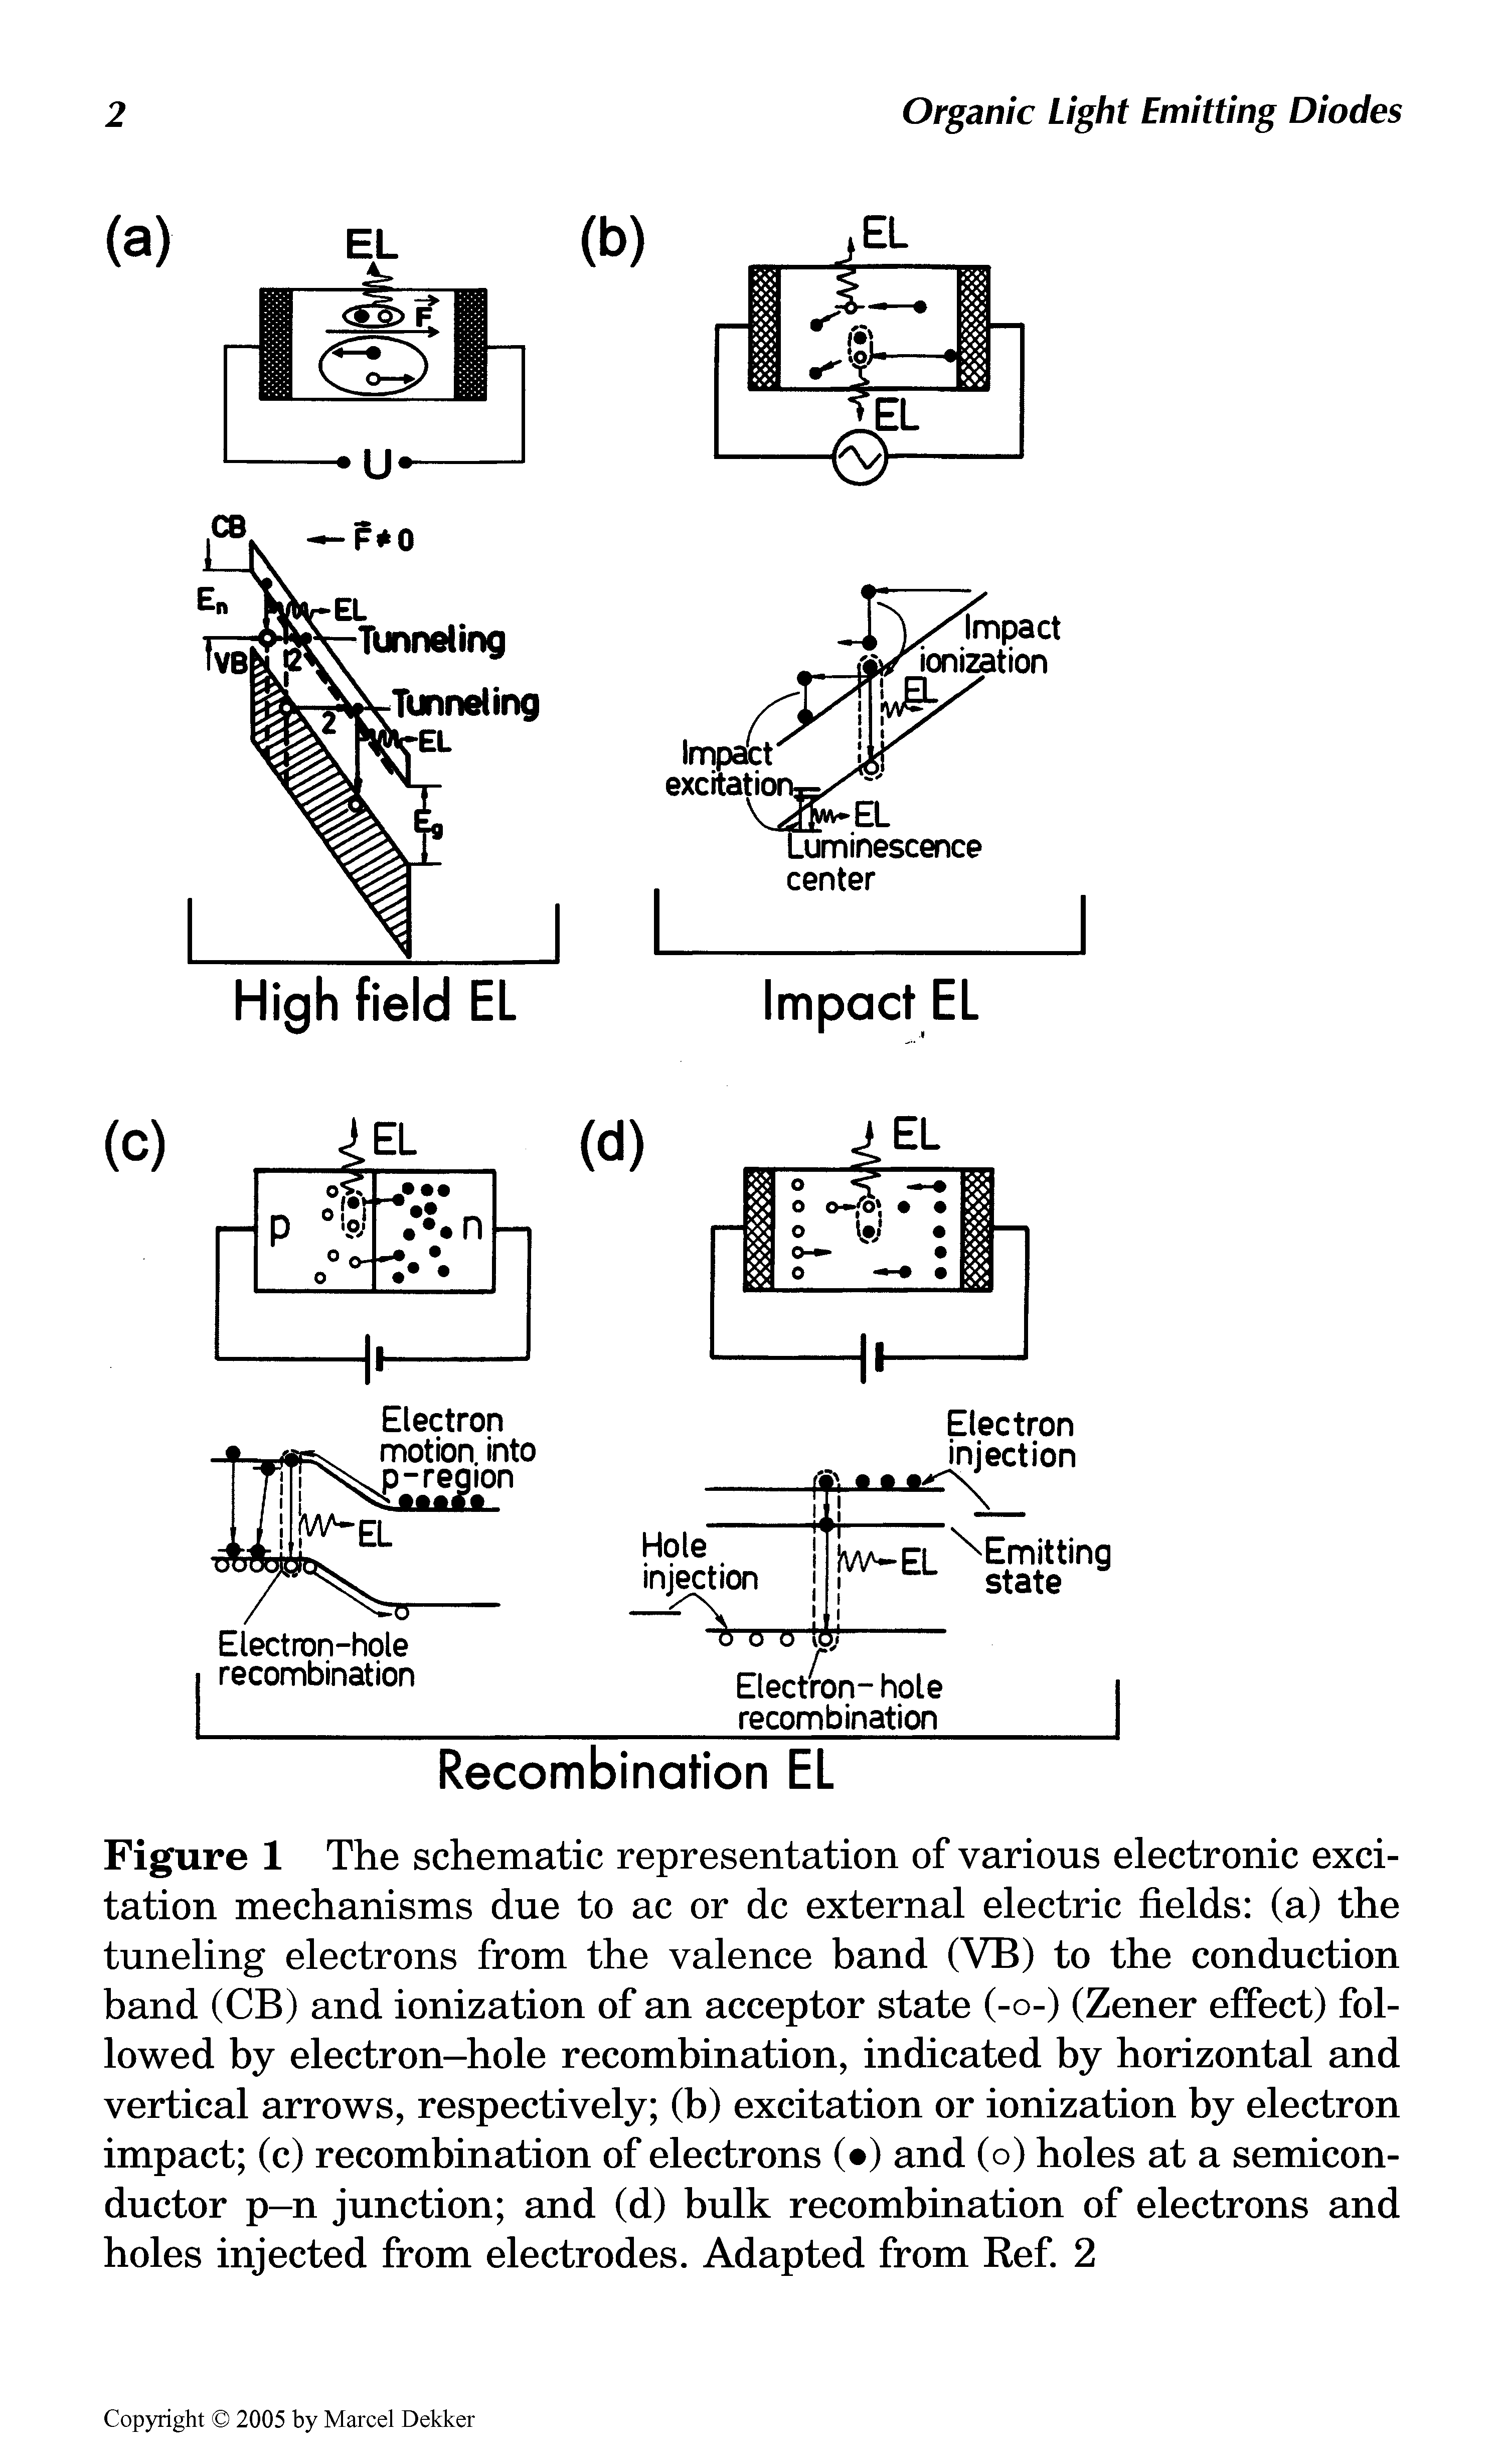 Figure 1 The schematic representation of various electronic excitation mechanisms due to ac or dc external electric fields (a) the tuneling electrons from the valence band (VB) to the conduction band (CB) and ionization of an acceptor state (-o-) (Zener effect) followed by electron-hole recombination, indicated by horizontal and vertical arrows, respectively (b) excitation or ionization by electron impact (c) recombination of electrons ( ) and (o) holes at a semiconductor p-n junction and (d) bulk recombination of electrons and holes injected from electrodes. Adapted from Ref. 2...